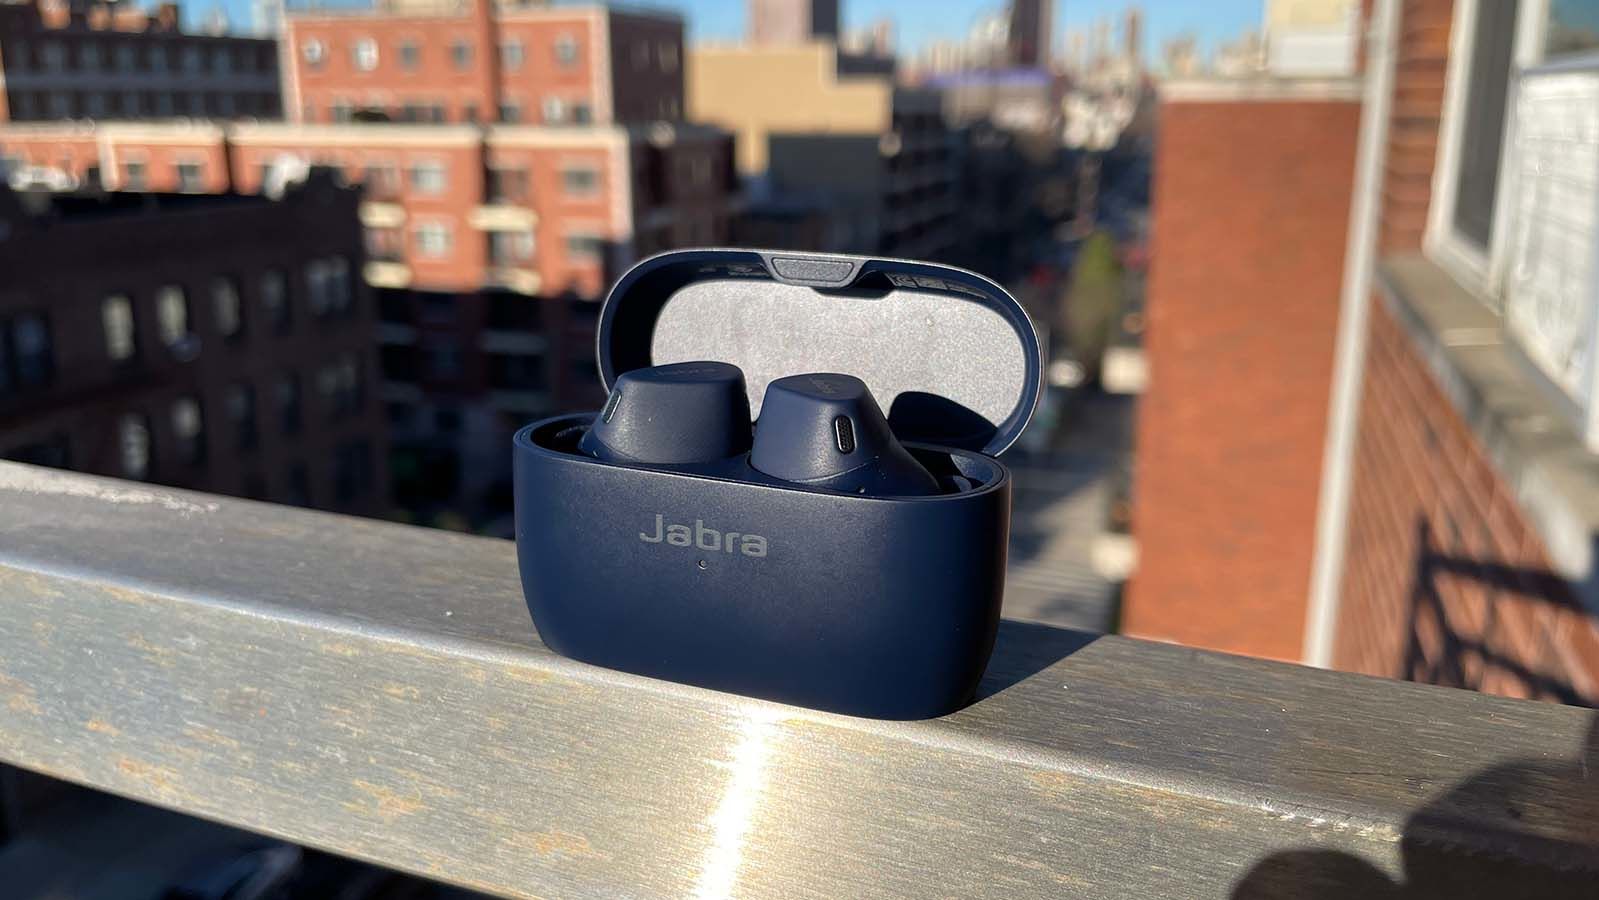 Get moving with clarity - Jabra Elite 4 Active Earbuds - Digital Reviews  Network